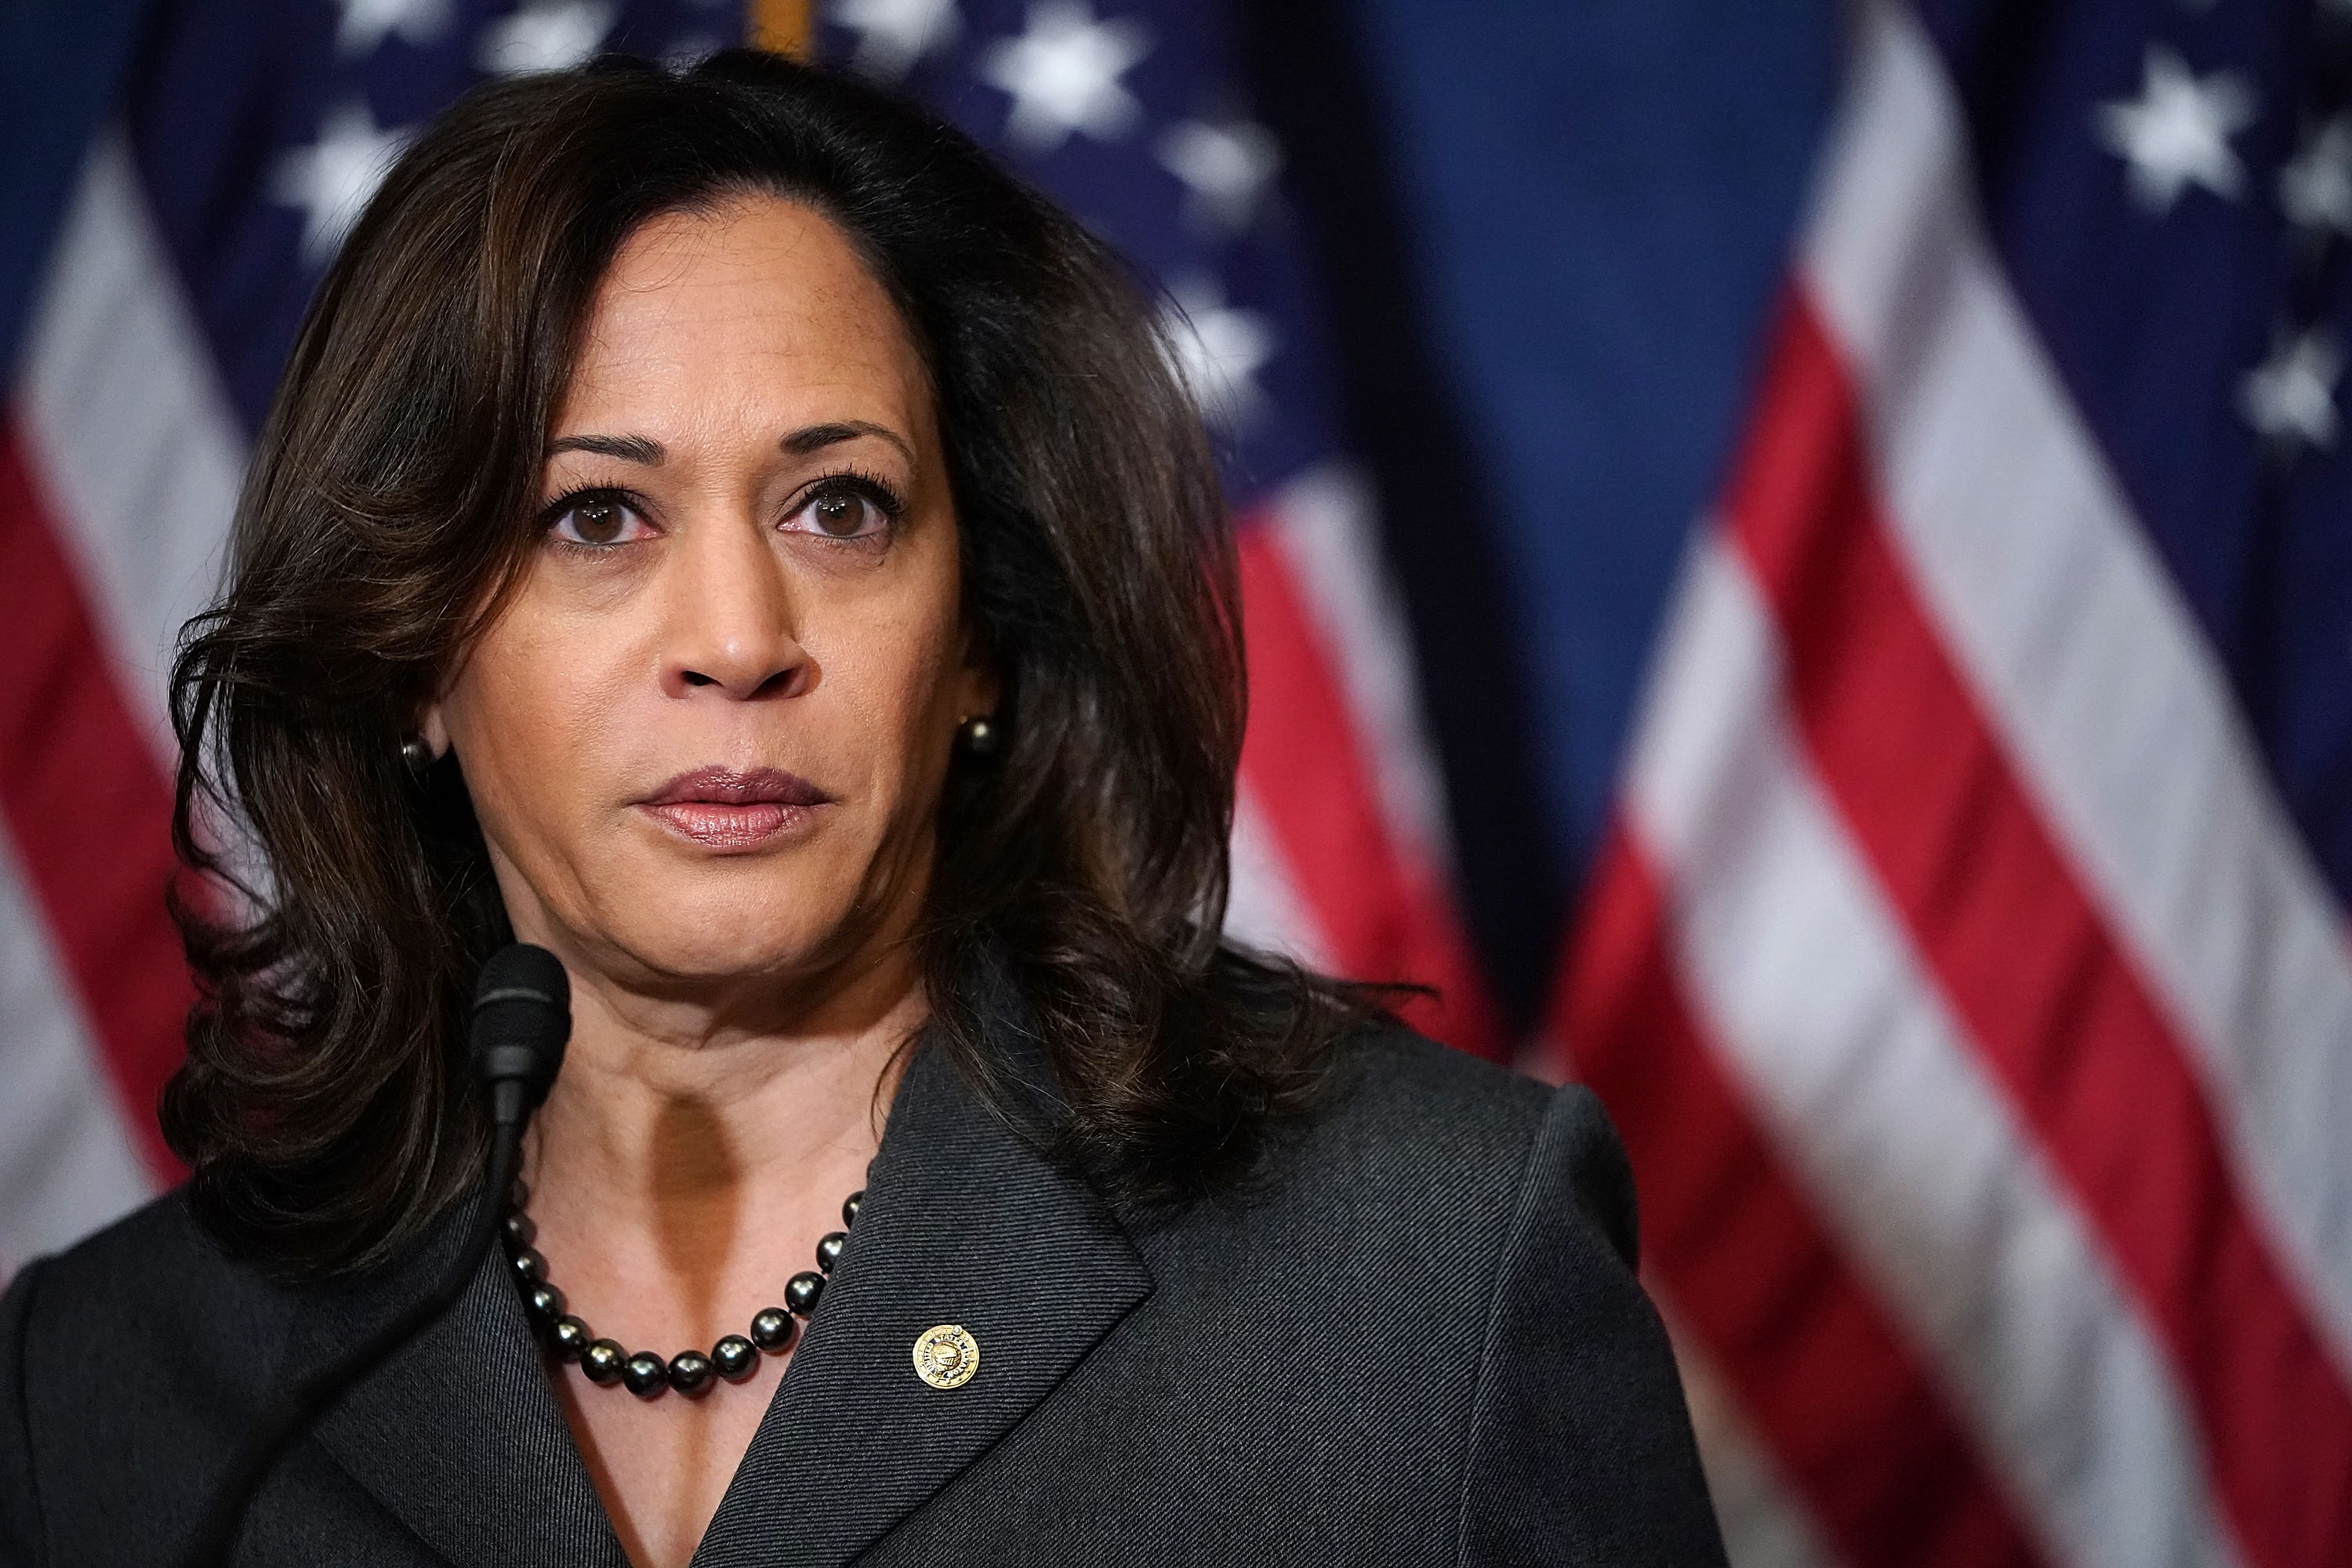 Sen. Kamala Harris (D-CA) speaks during a news conference with fellow Democrats, 'Dreamers' and university presidents and chancellors to call for passage of the Dream Act at the U.S. Capitol October 25, 2017 in Washington, DC. Chip Somodevilla—Getty Images (Chip Somodevilla—Getty Images)